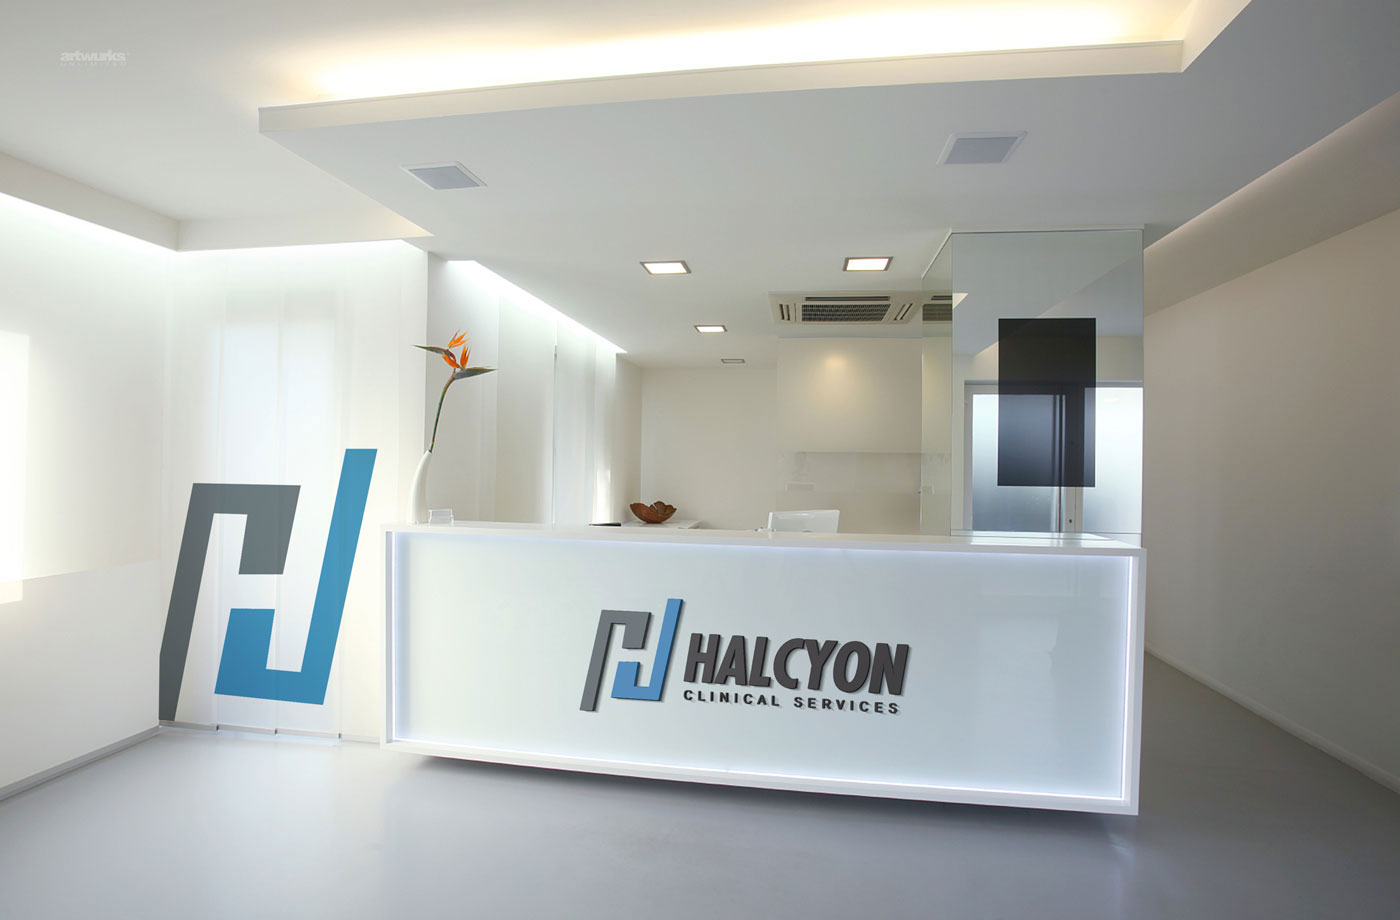 Halcyon Clinical Services Identity